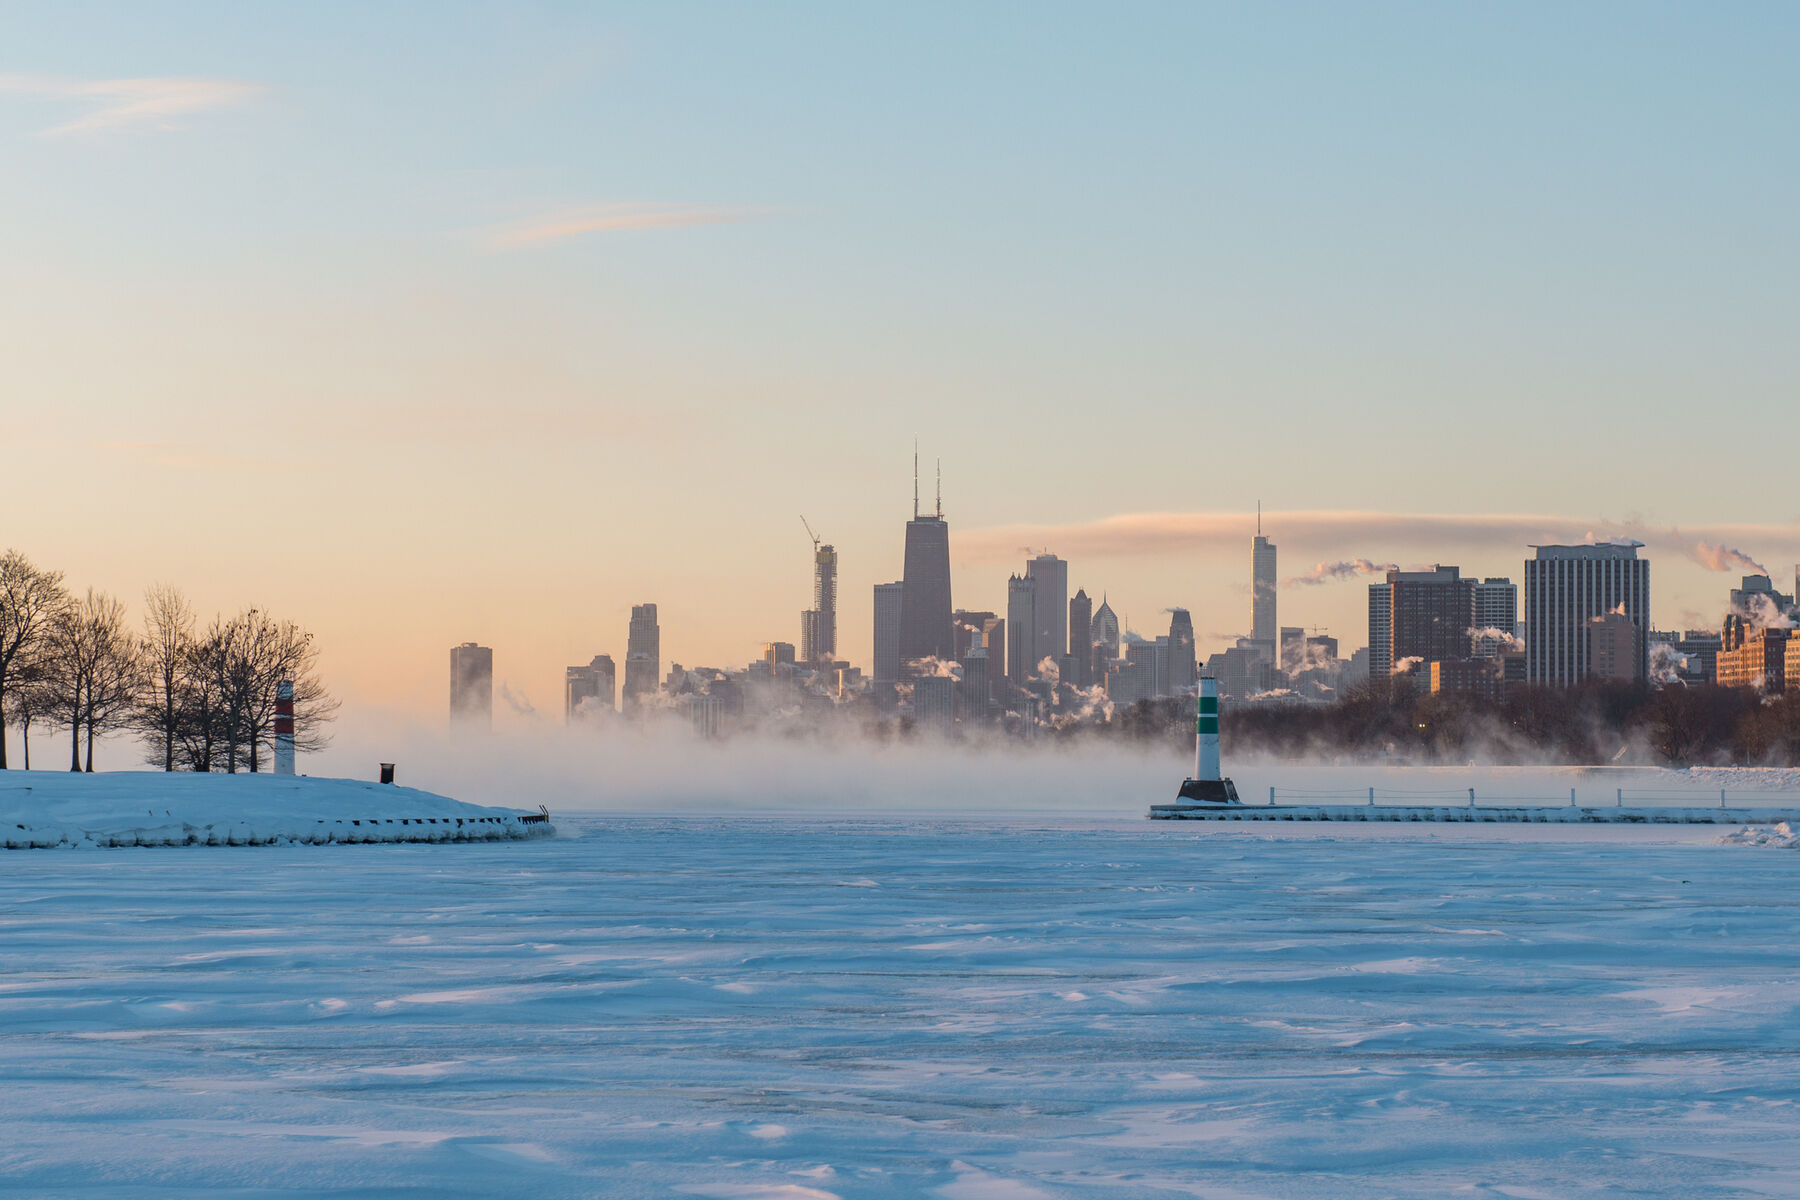 A frozen Lake Michigan and Chicago skyline during the Polar vortex climate event of 2019.